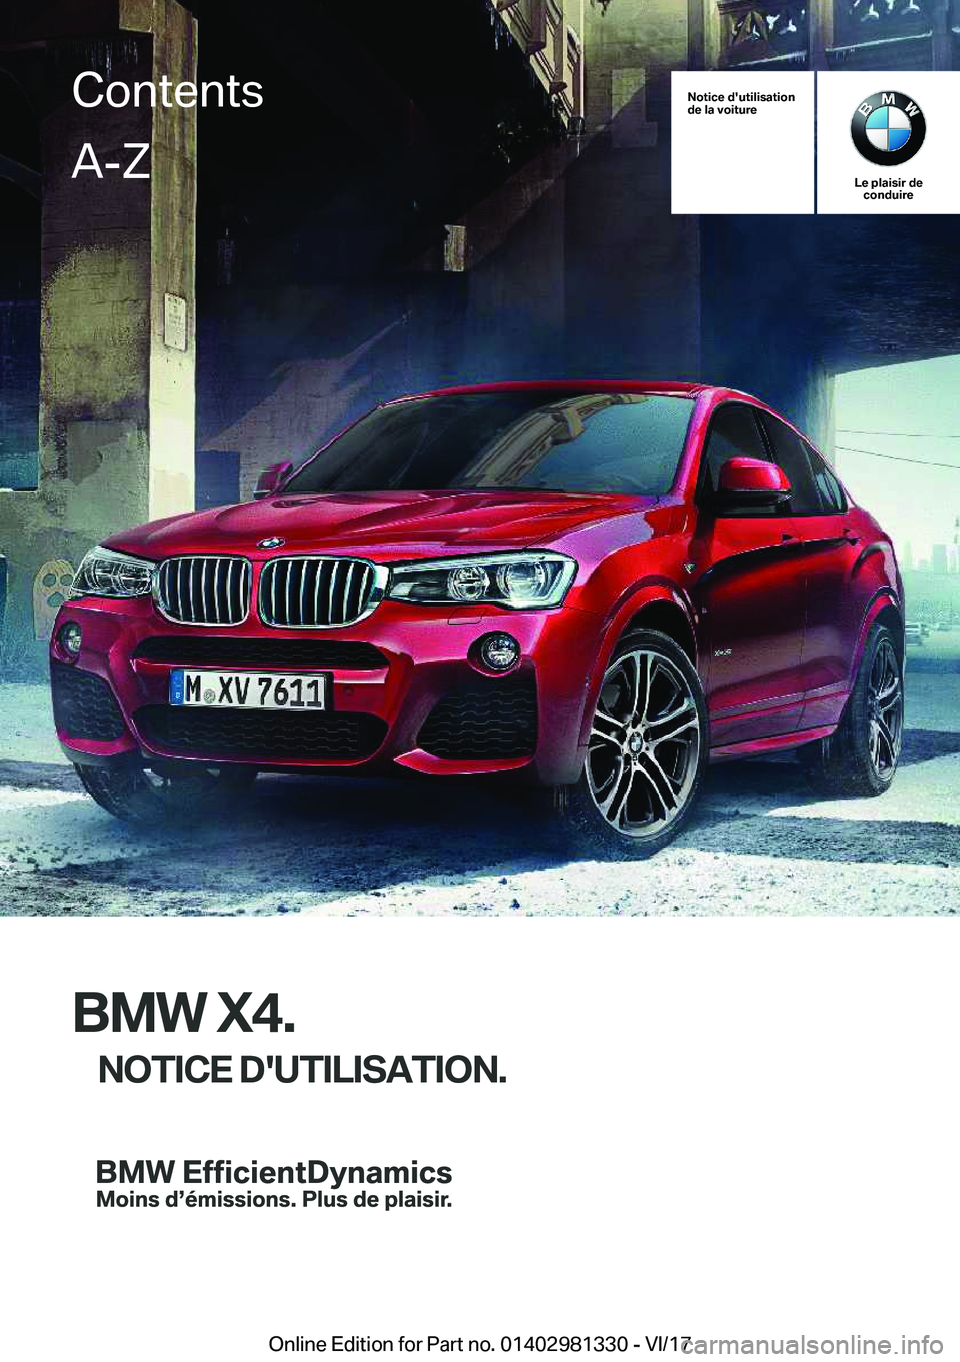 BMW X4 2018  Notices Demploi (in French) �N�o�t�i�c�e��d�'�u�t�i�l�i�s�a�t�i�o�n
�d�e��l�a��v�o�i�t�u�r�e
�L�e��p�l�a�i�s�i�r��d�e �c�o�n�d�u�i�r�e
�B�M�W��X�4�.
�N�O�T�I�C�E��D�'�U�T�I�L�I�S�A�T�I�O�N�.
�C�o�n�t�e�n�t�s�A�-�Z